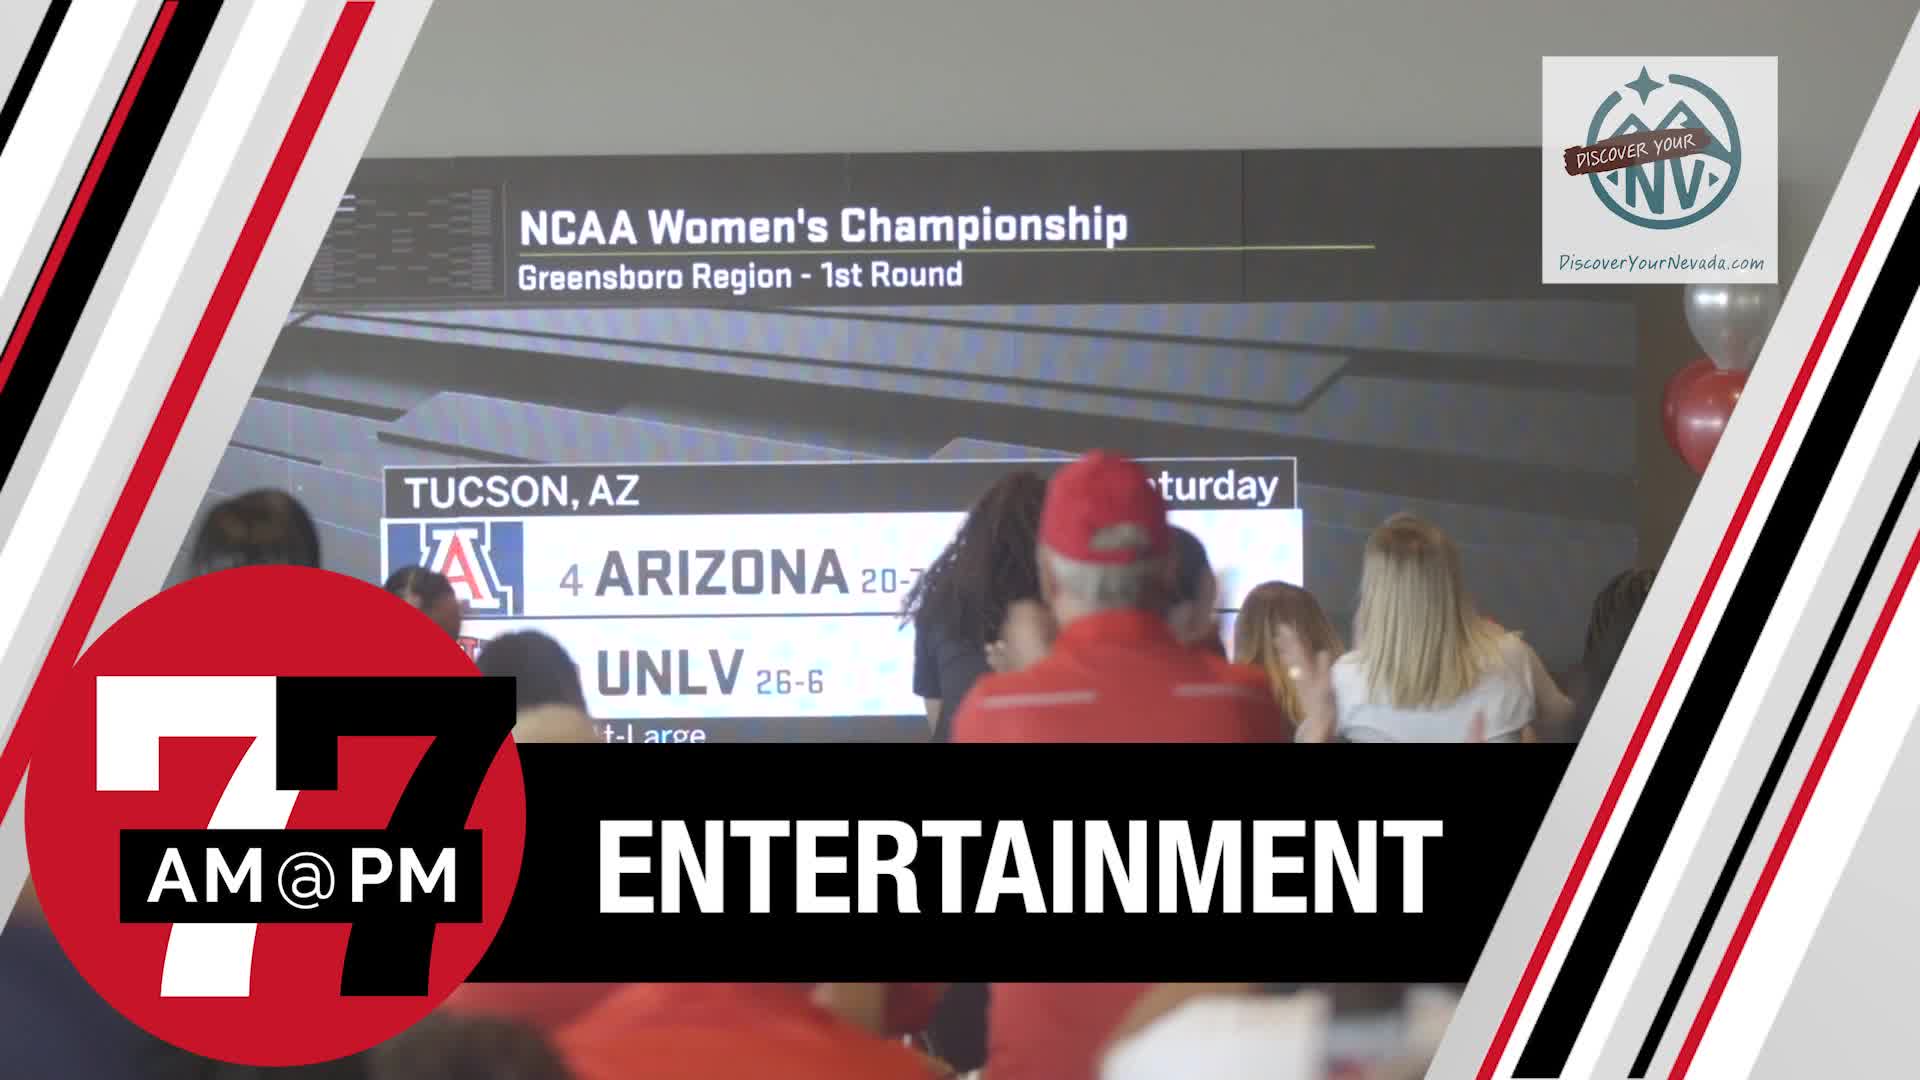 Lady Rebels Seeded 13th, Set to Play Arizona